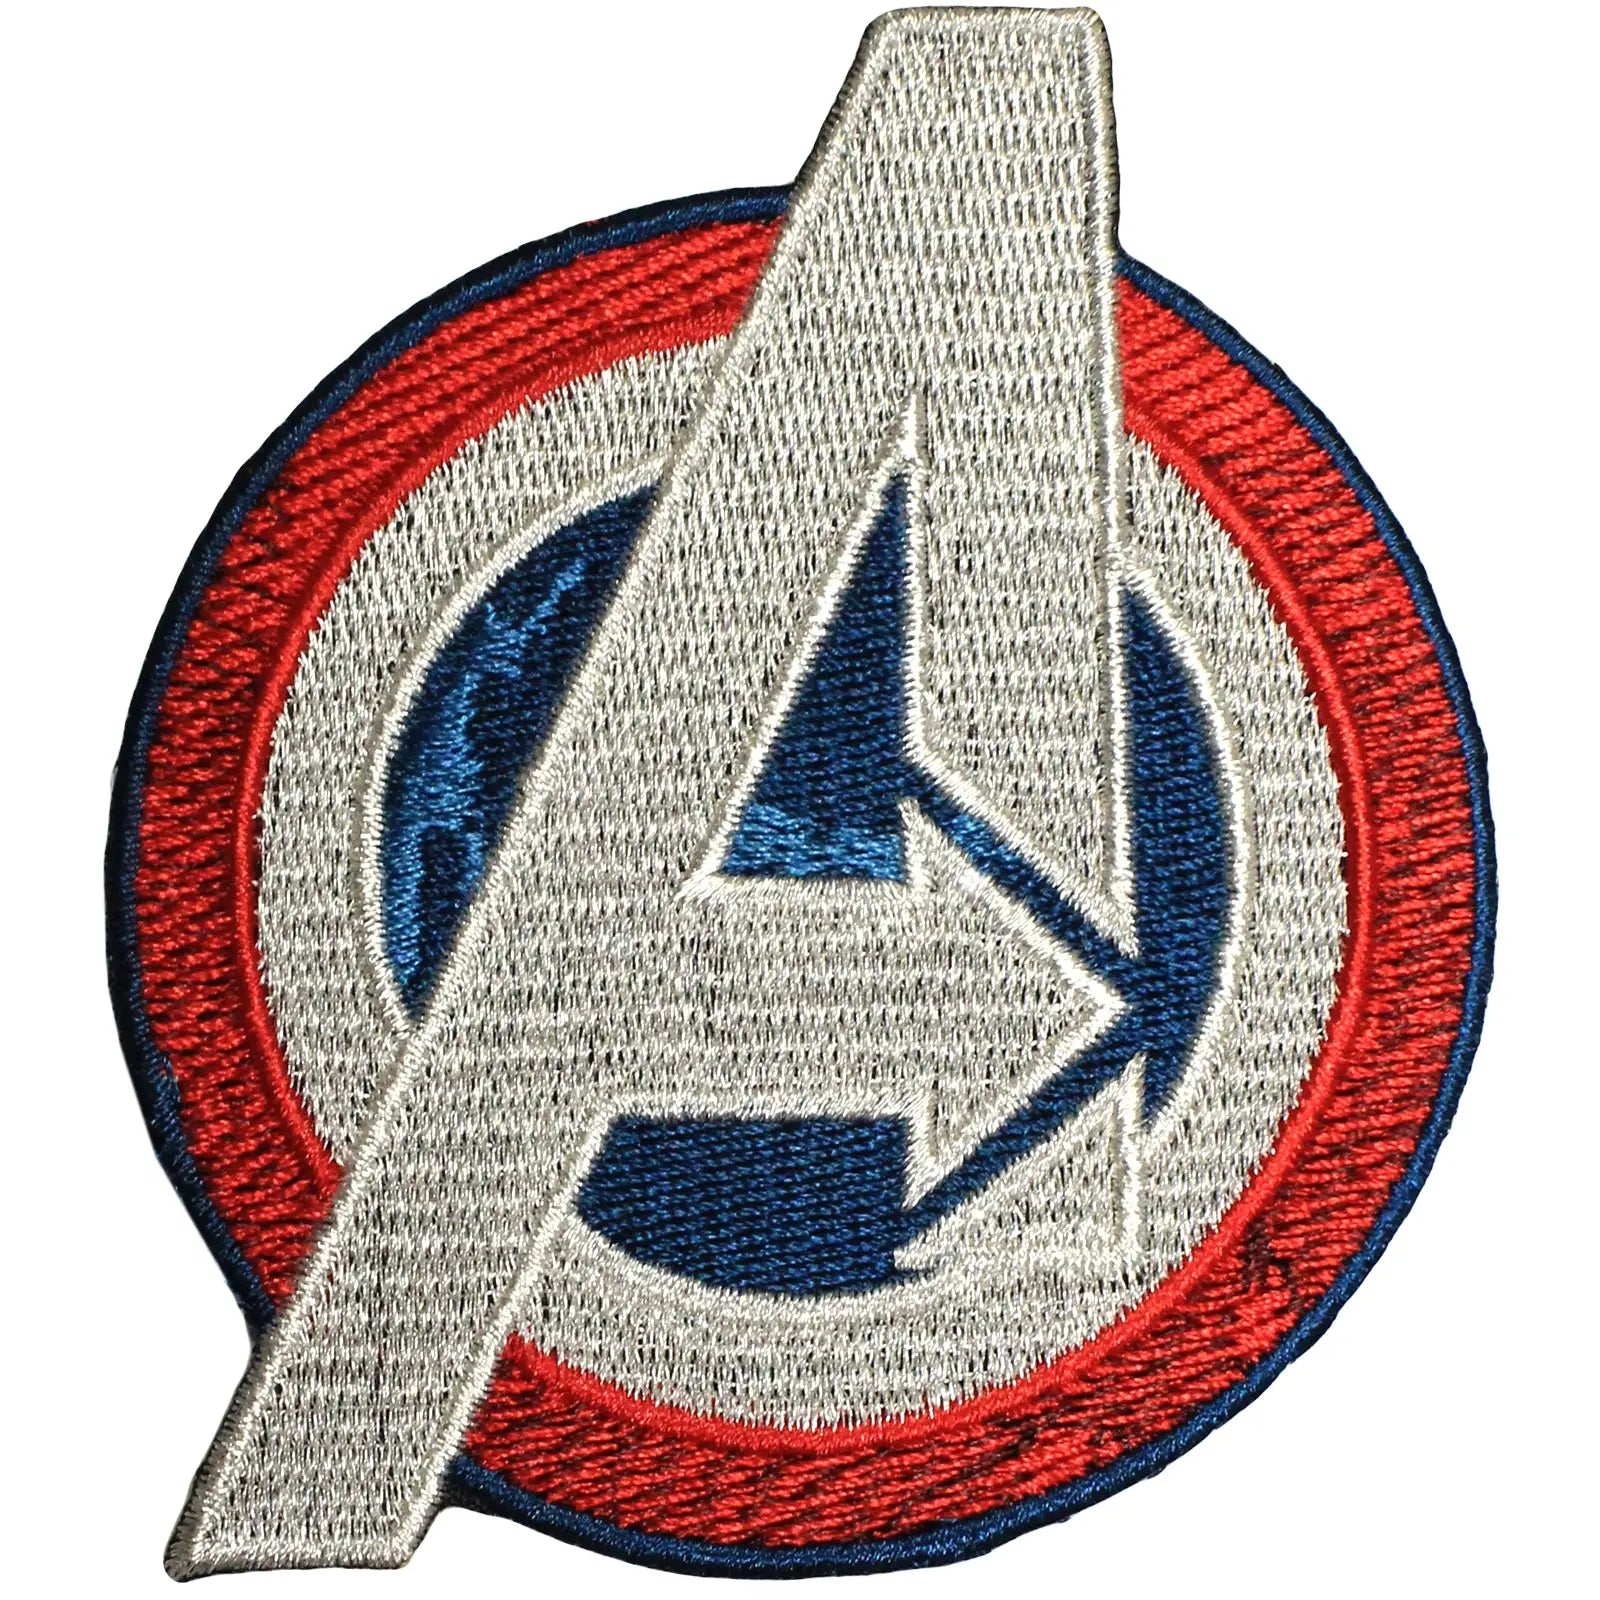 The Avengers Age of Ultron 'A' Logo Iron on Patch 